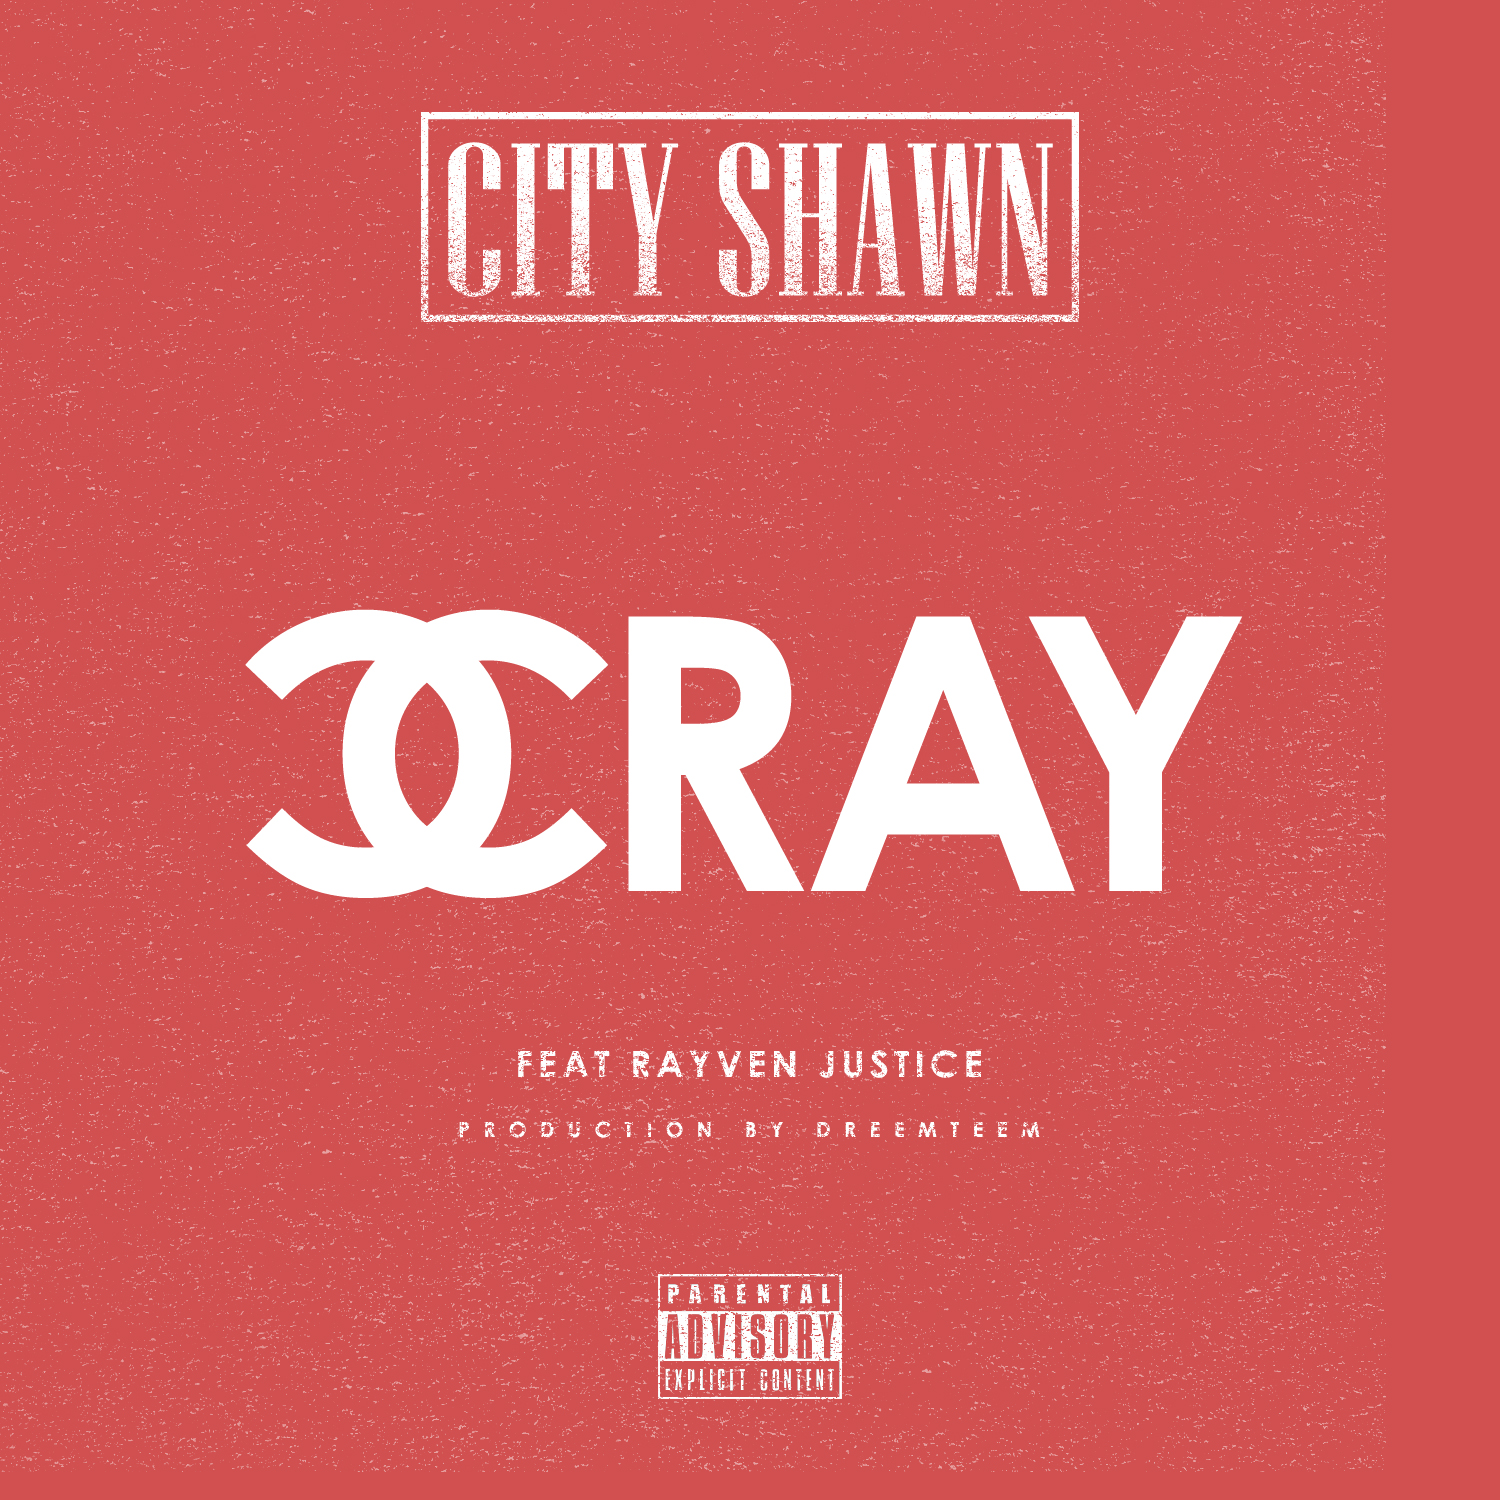 City Shawn ft. Rayven Justice - Cray [Thizzler.com]